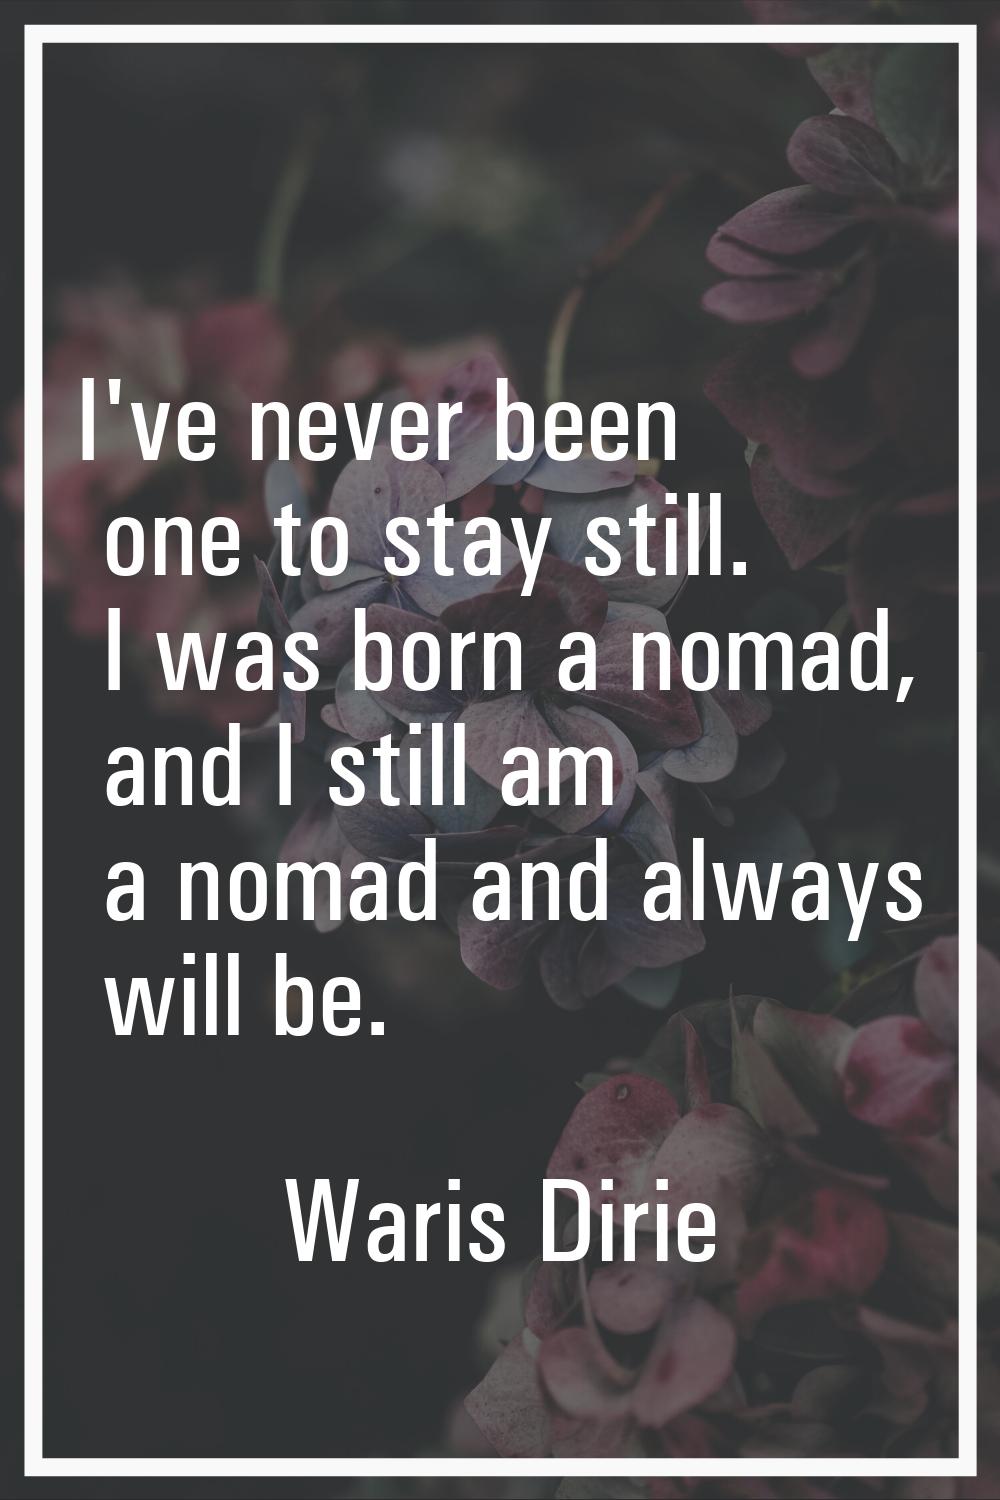 I've never been one to stay still. I was born a nomad, and I still am a nomad and always will be.